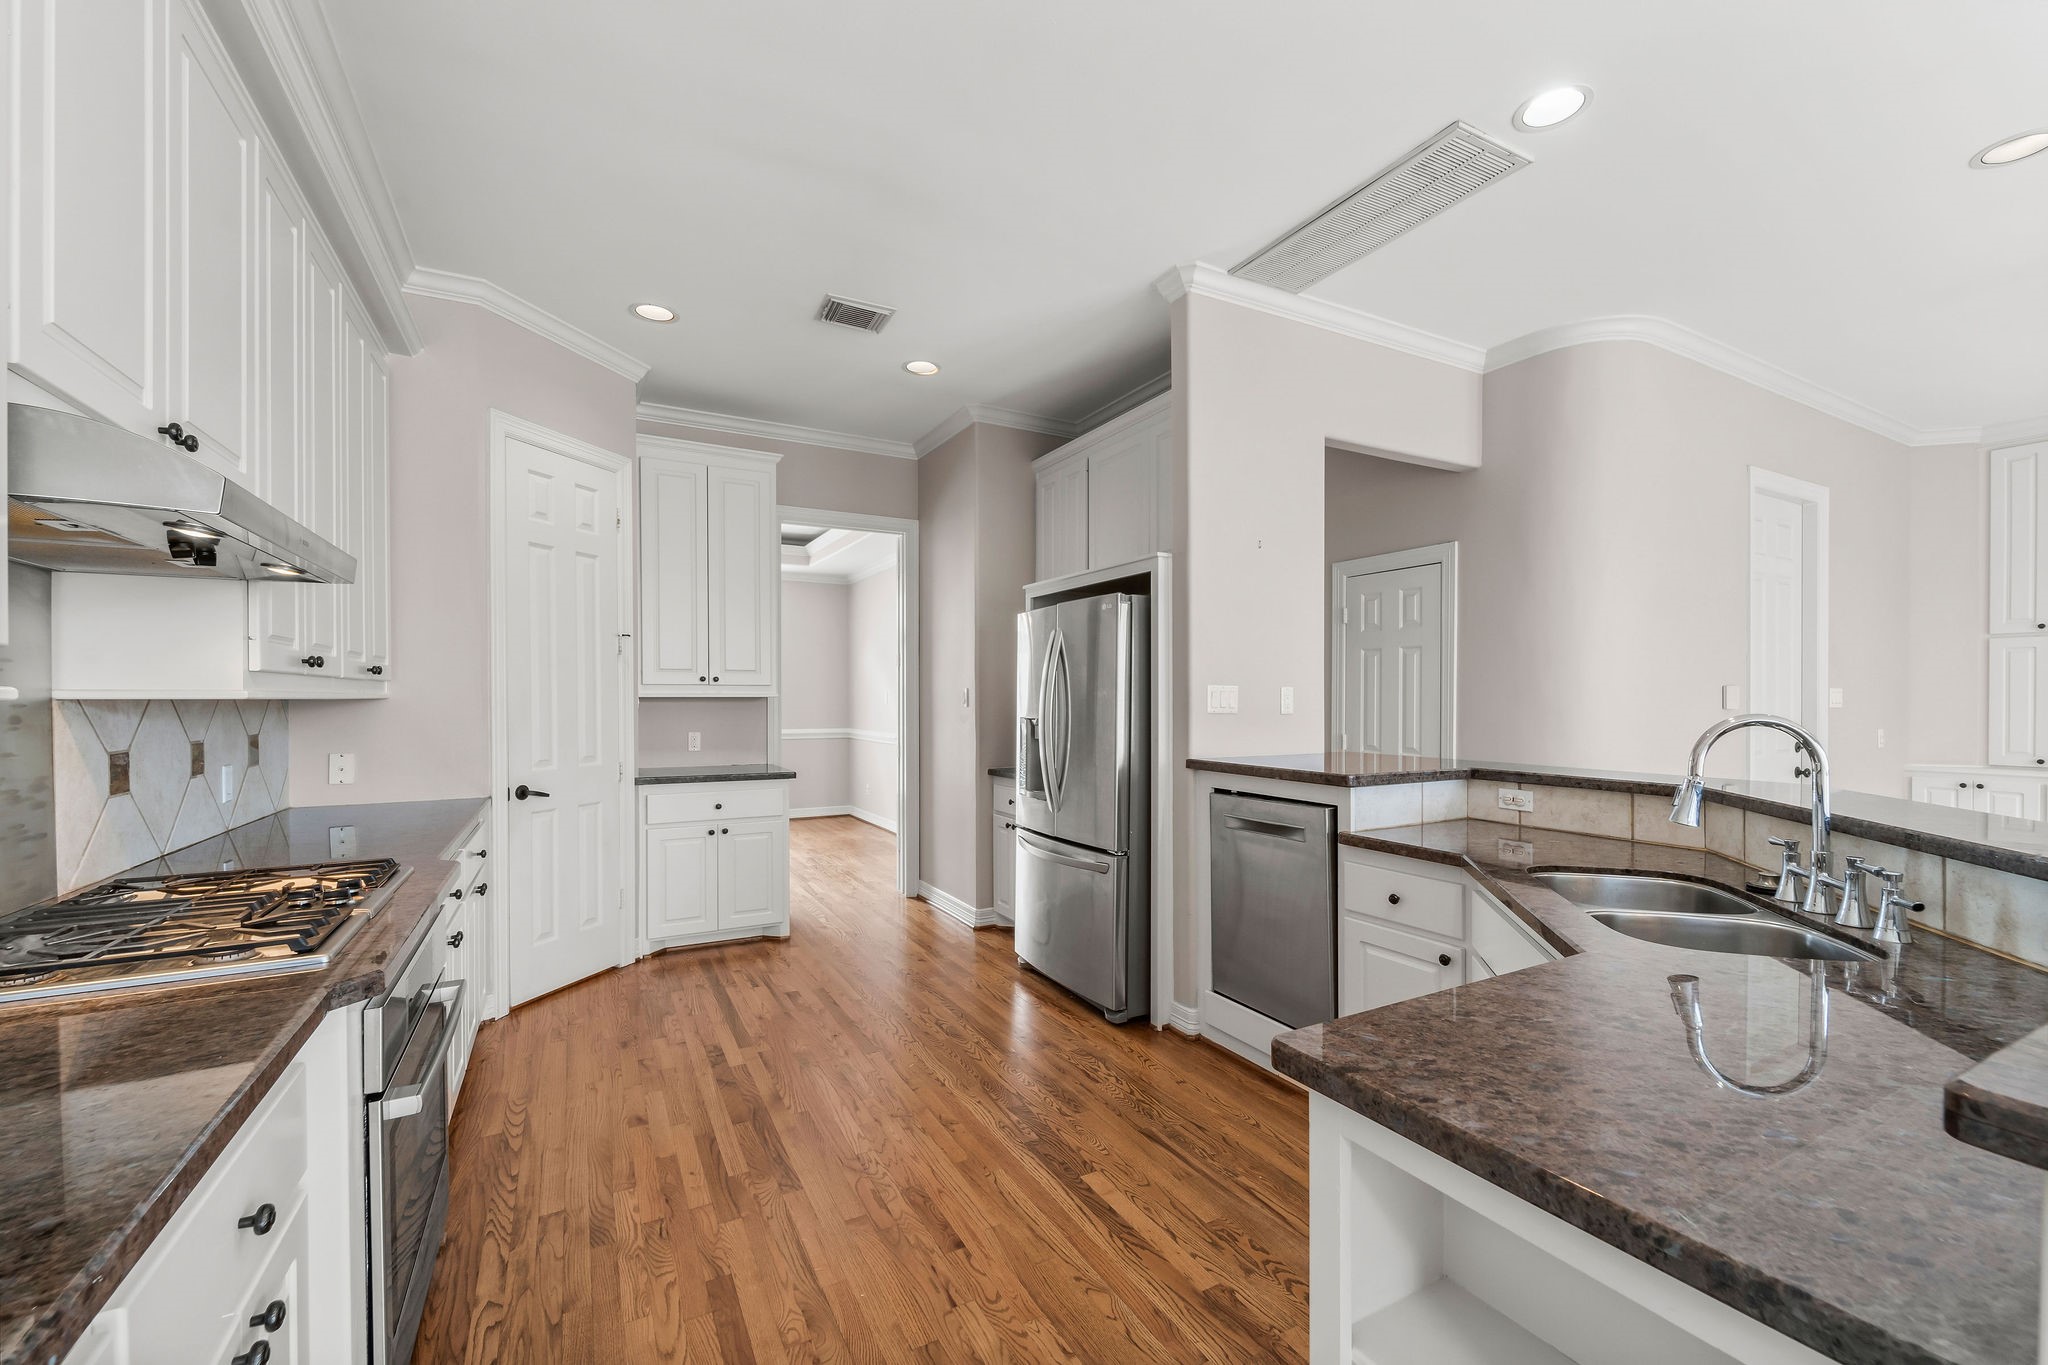 Stainless steel Bosch appliances, granite countertops, tons of storage and a pantry. Elevated Dishwasher offers easy loading and unloading.